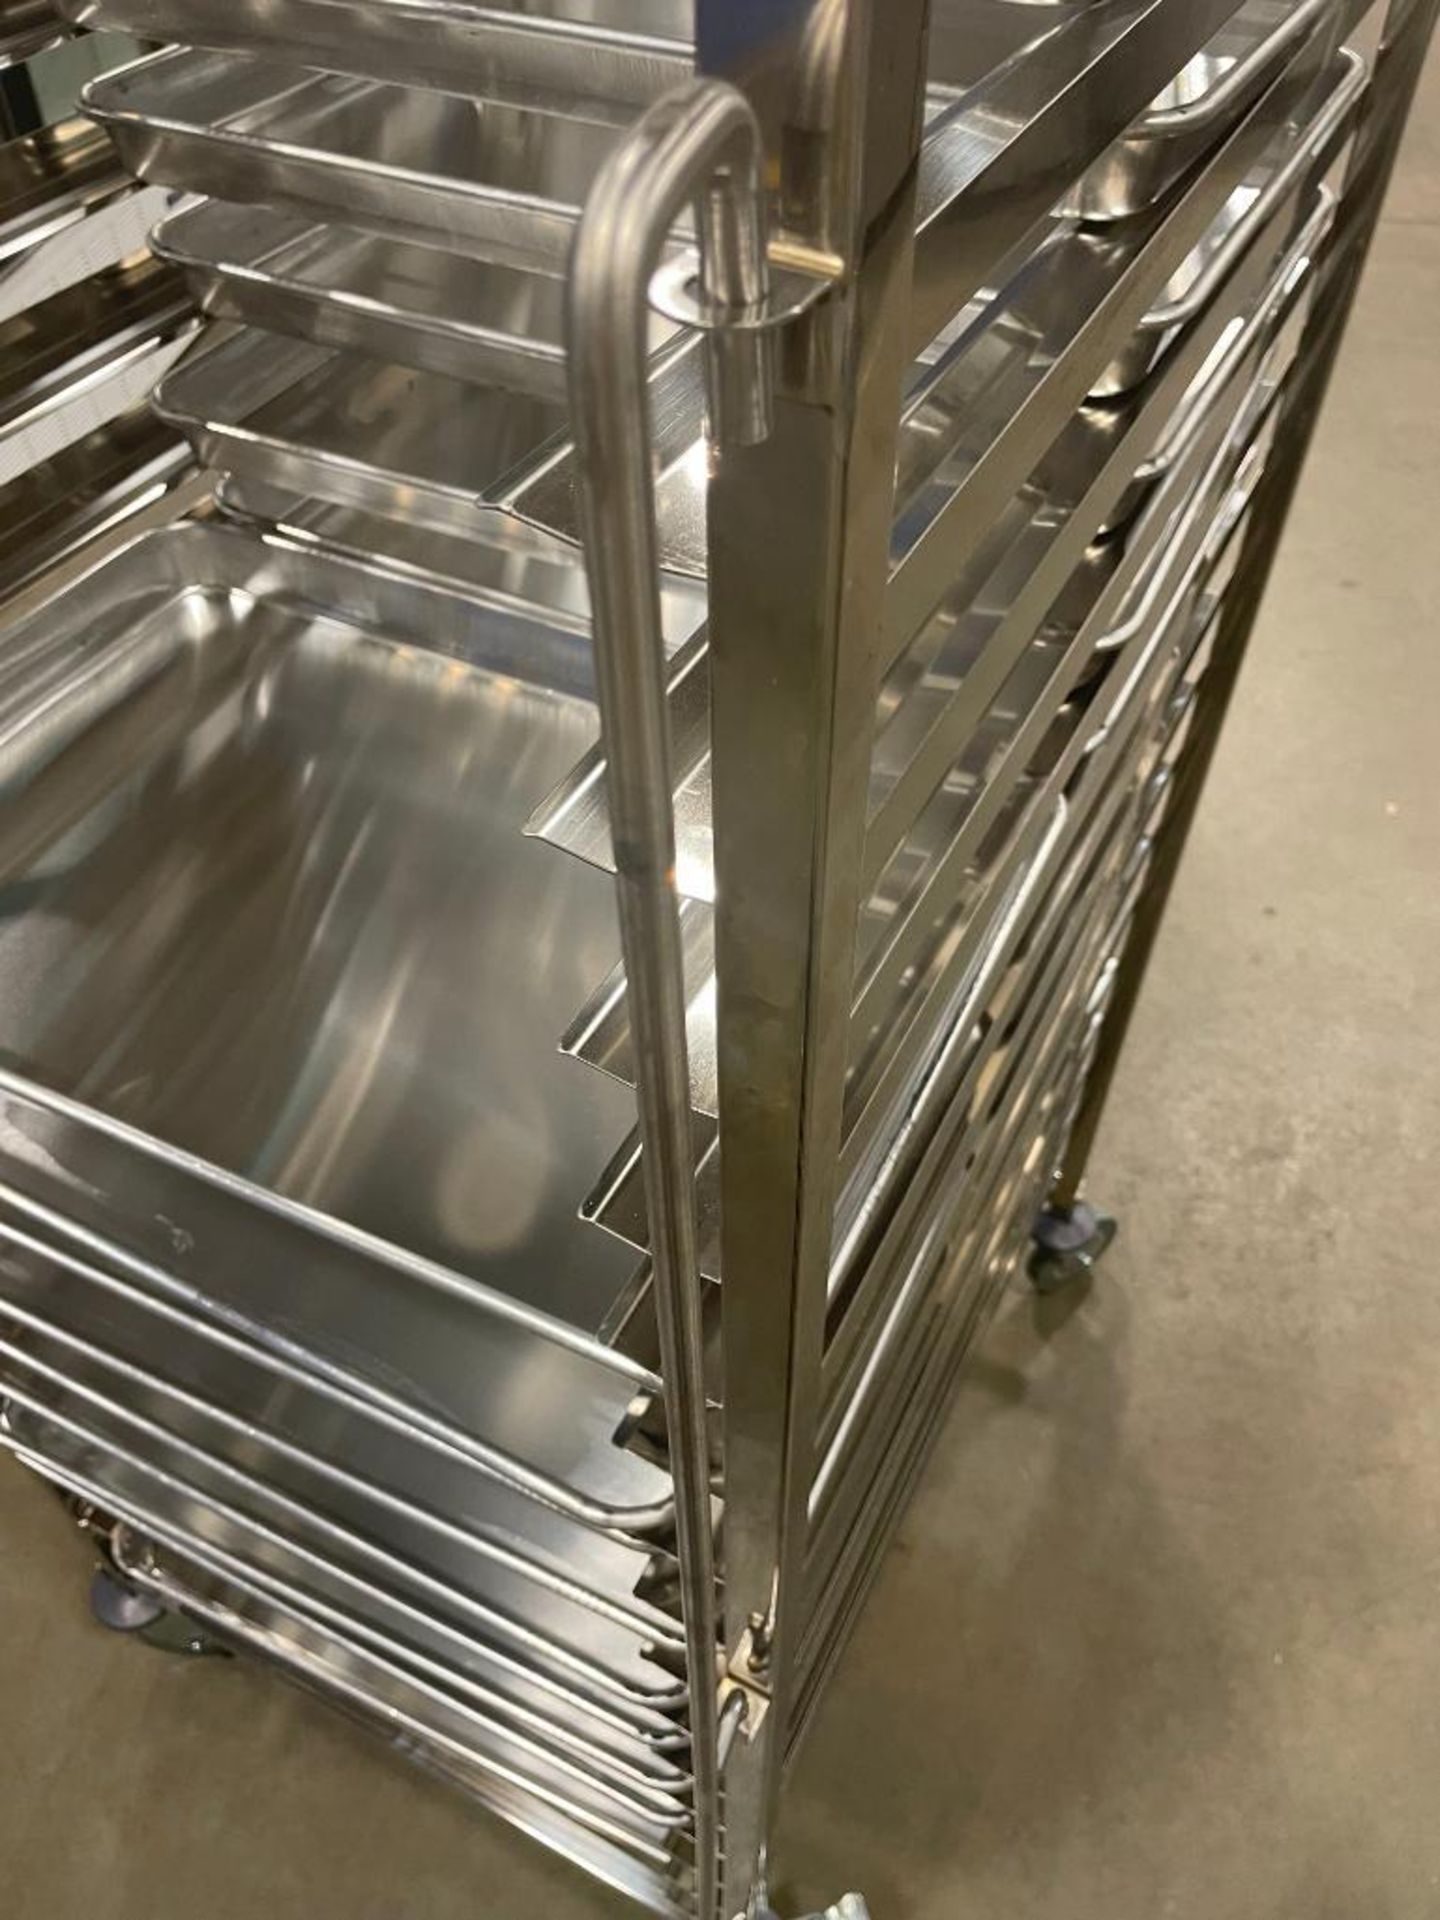 NEW STAINLESS STEEL 16-SLOT OVERSIZED BUN PAN RACK WITH PAN GUARD & (22) PANS - Image 4 of 9